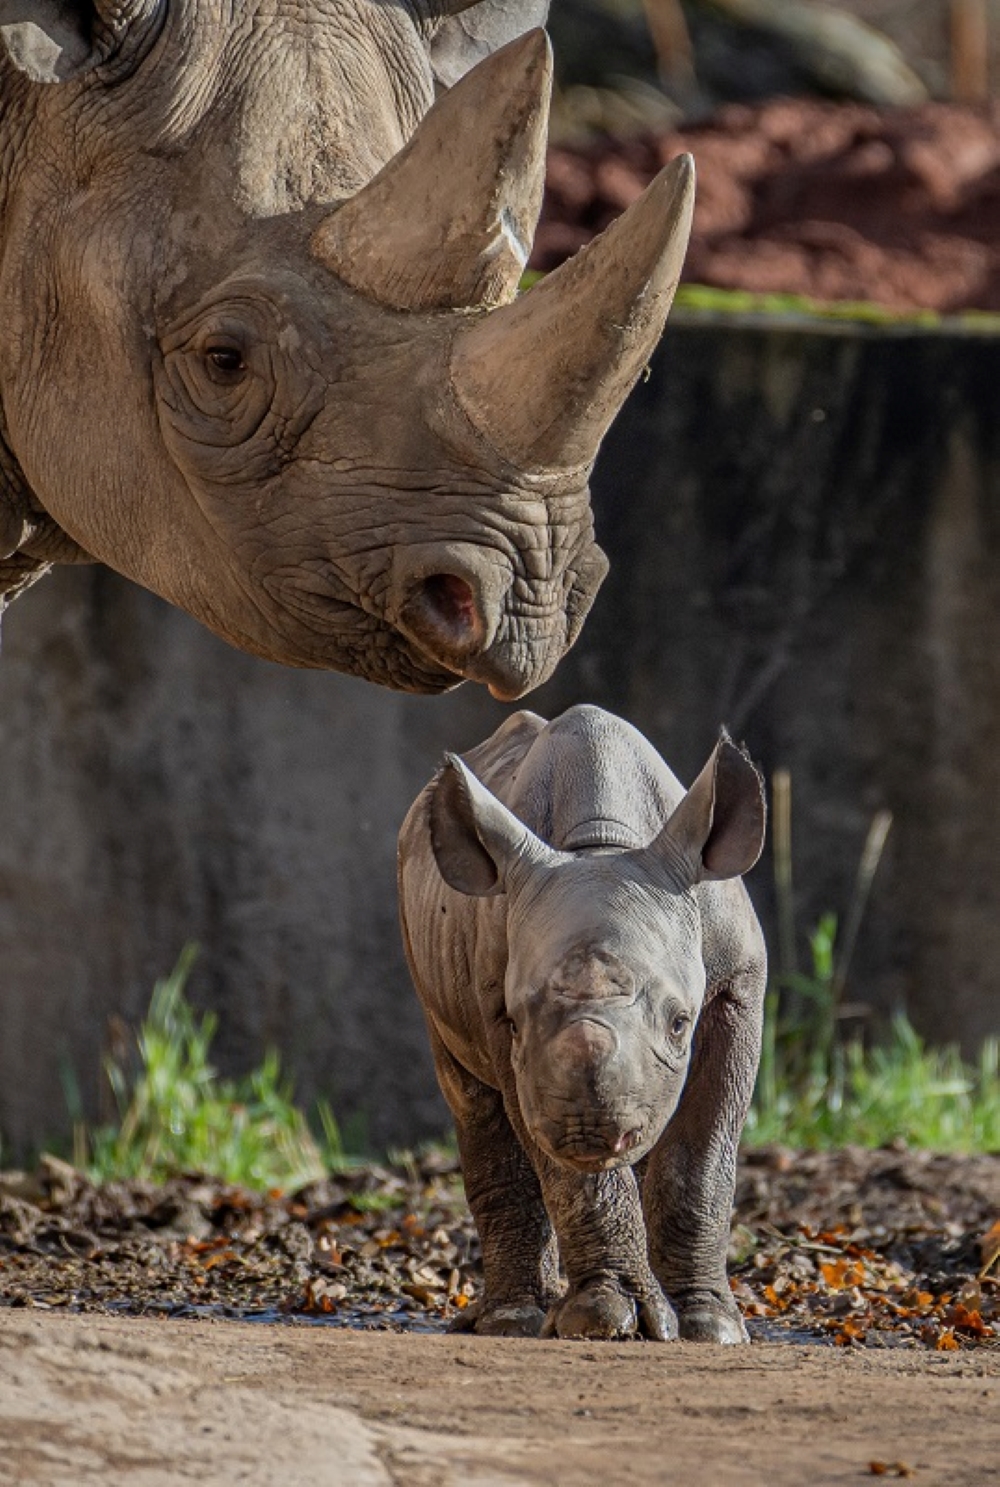 Zookeepers at a Cheshire Zoo have celebrated the birth of a “critically endangered” eastern black rhino.